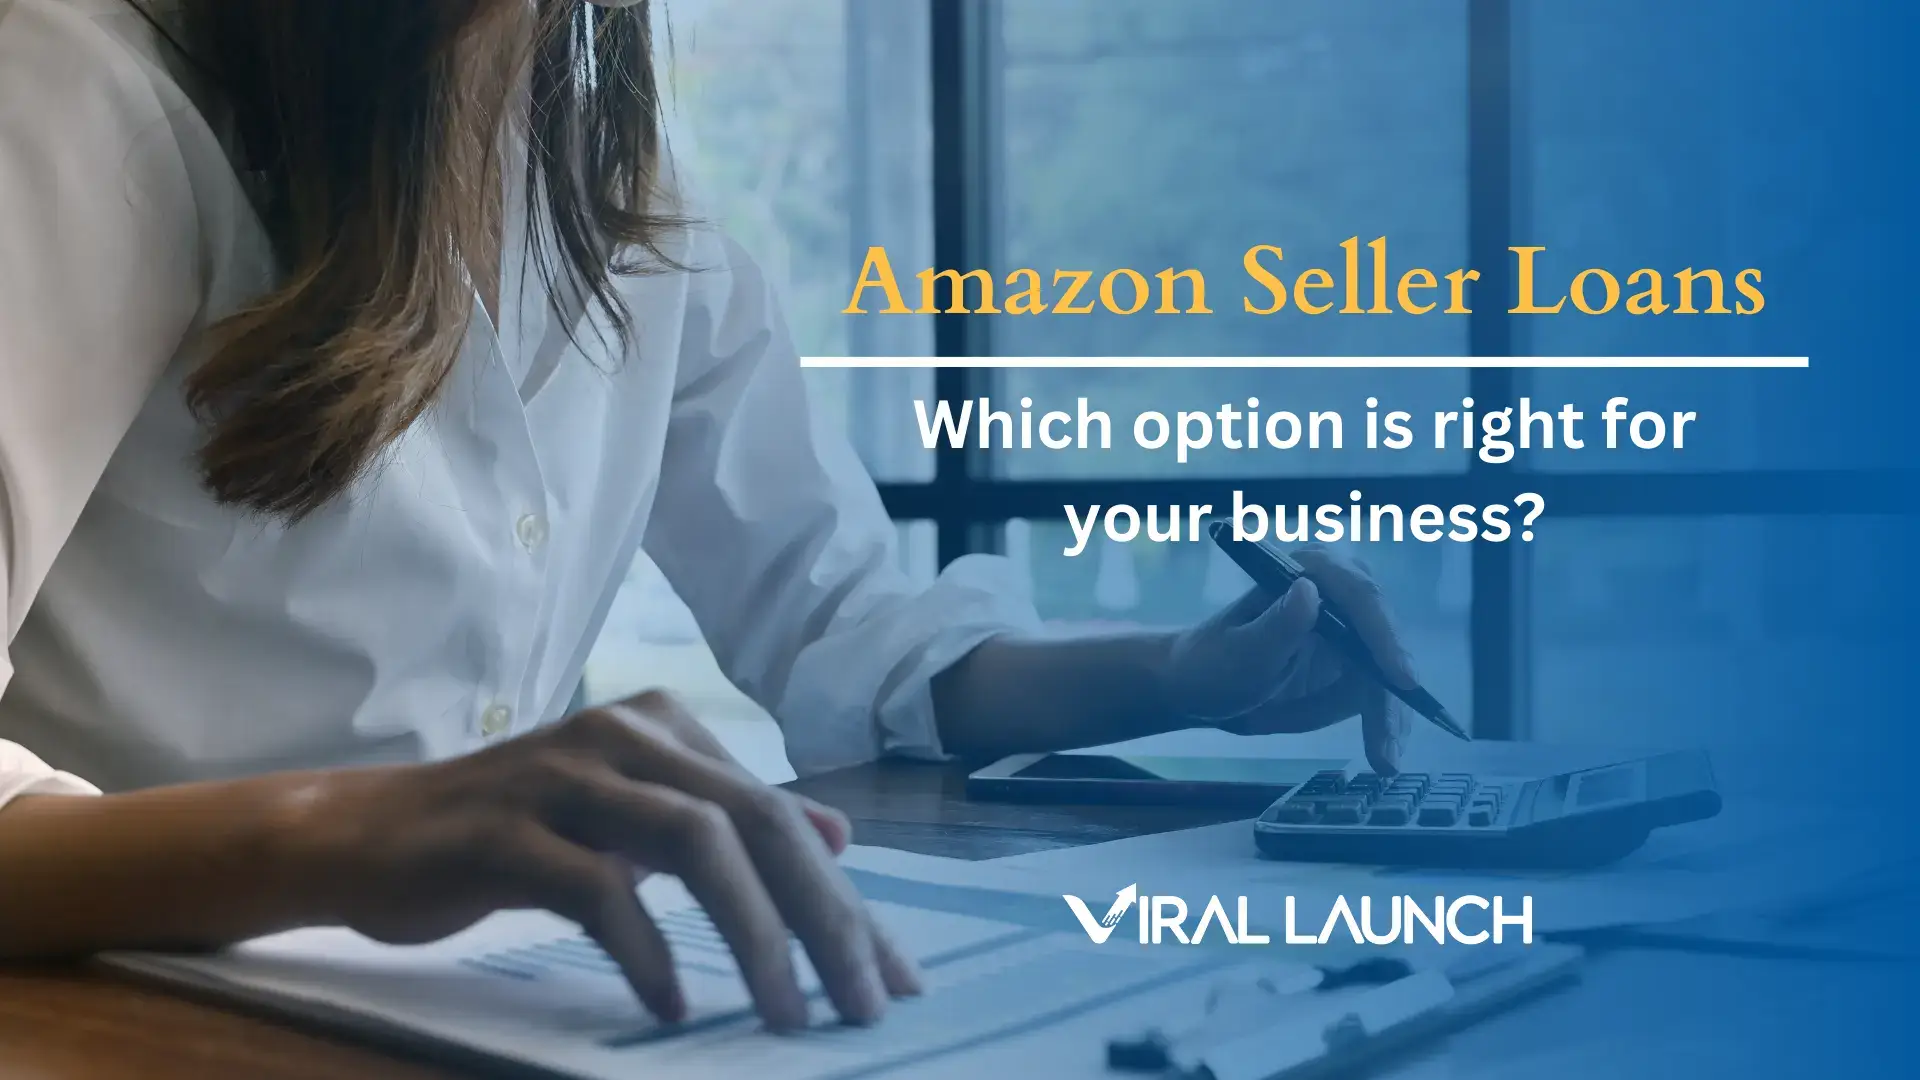 Amazon loan options for business financing.